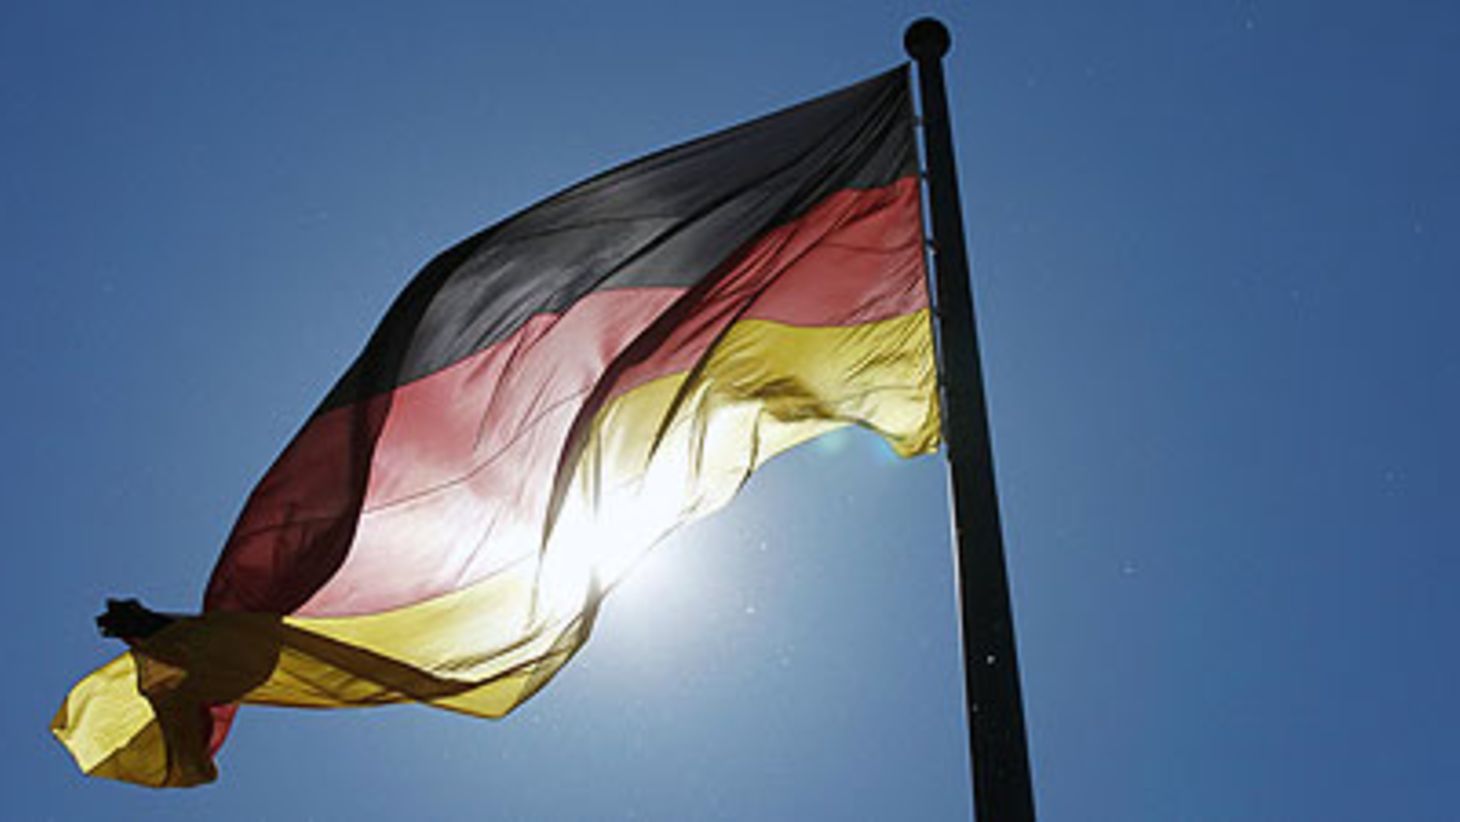 PokerStars Reduces Services to Germany Following Rollover Tax Implementation